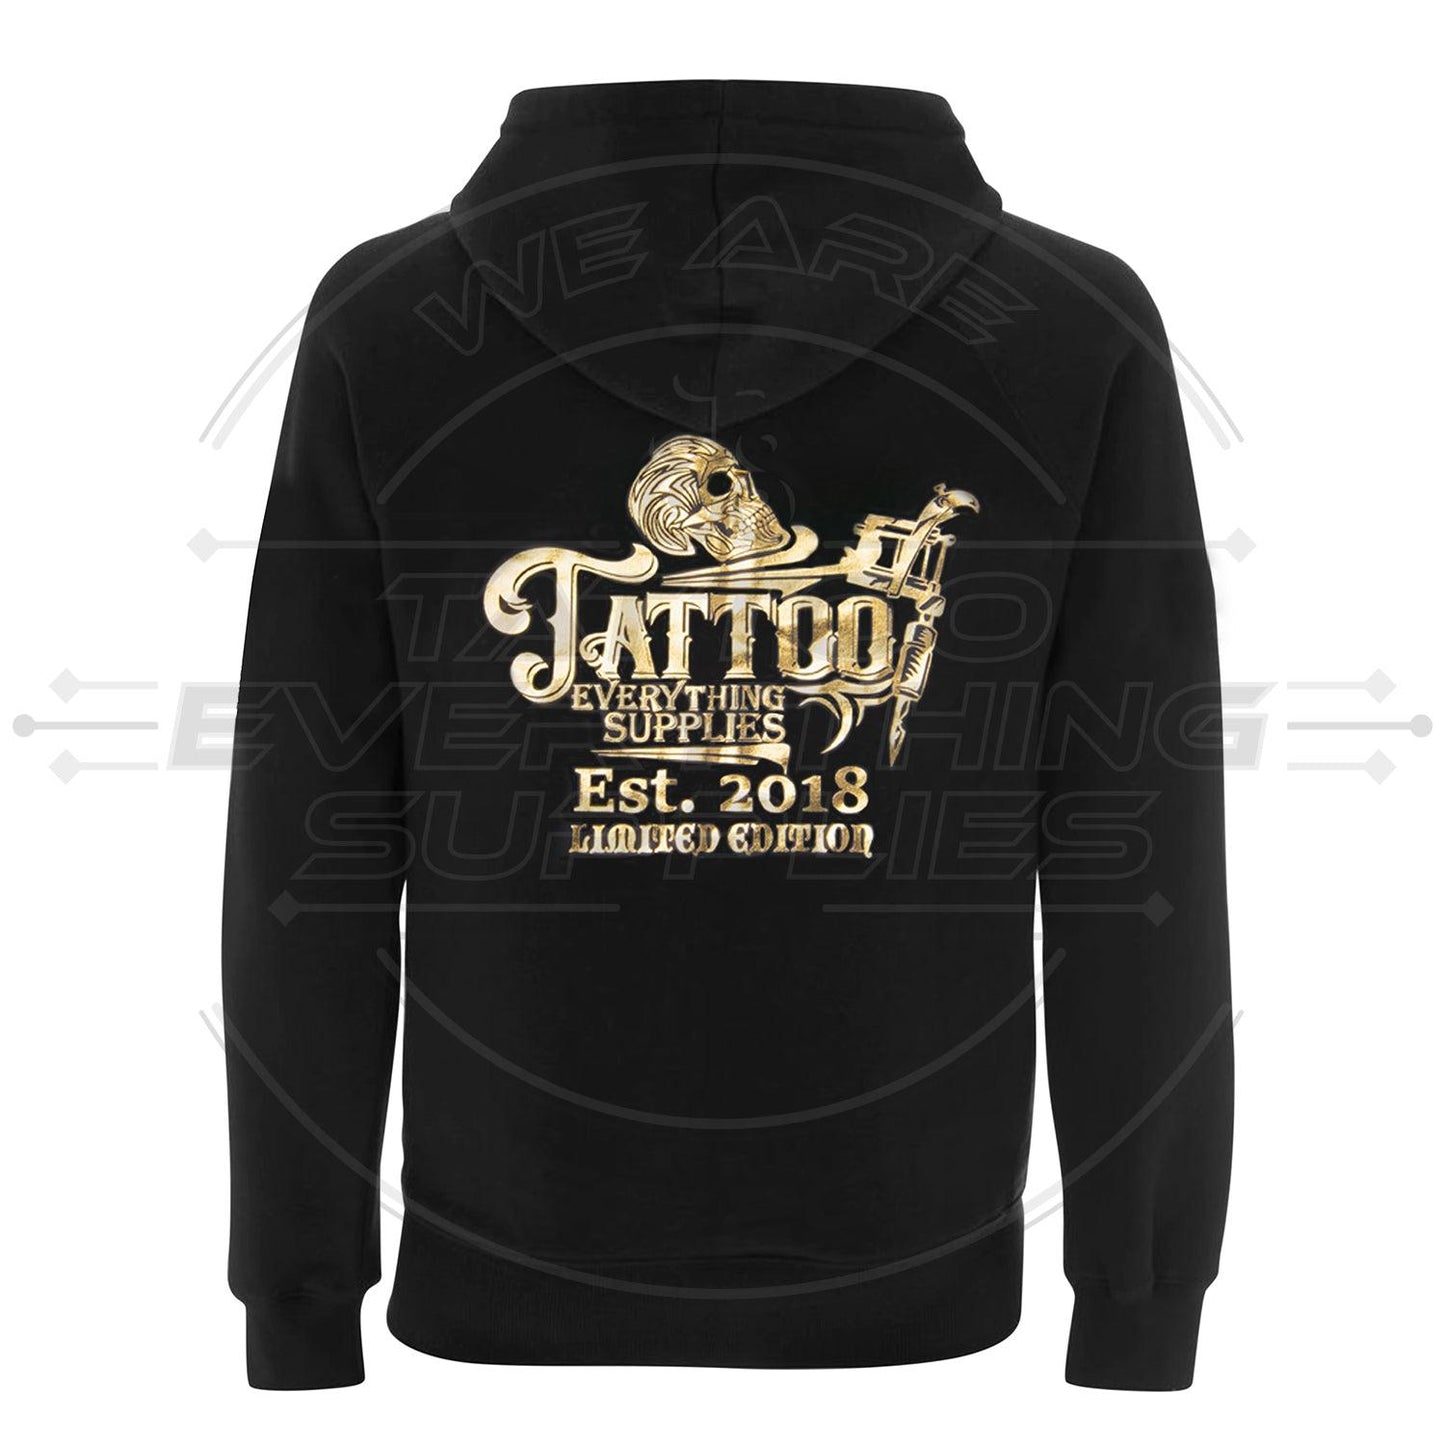 Tattoo Everything Supplies Hoody - Limited Edition Dark Navy/Gold